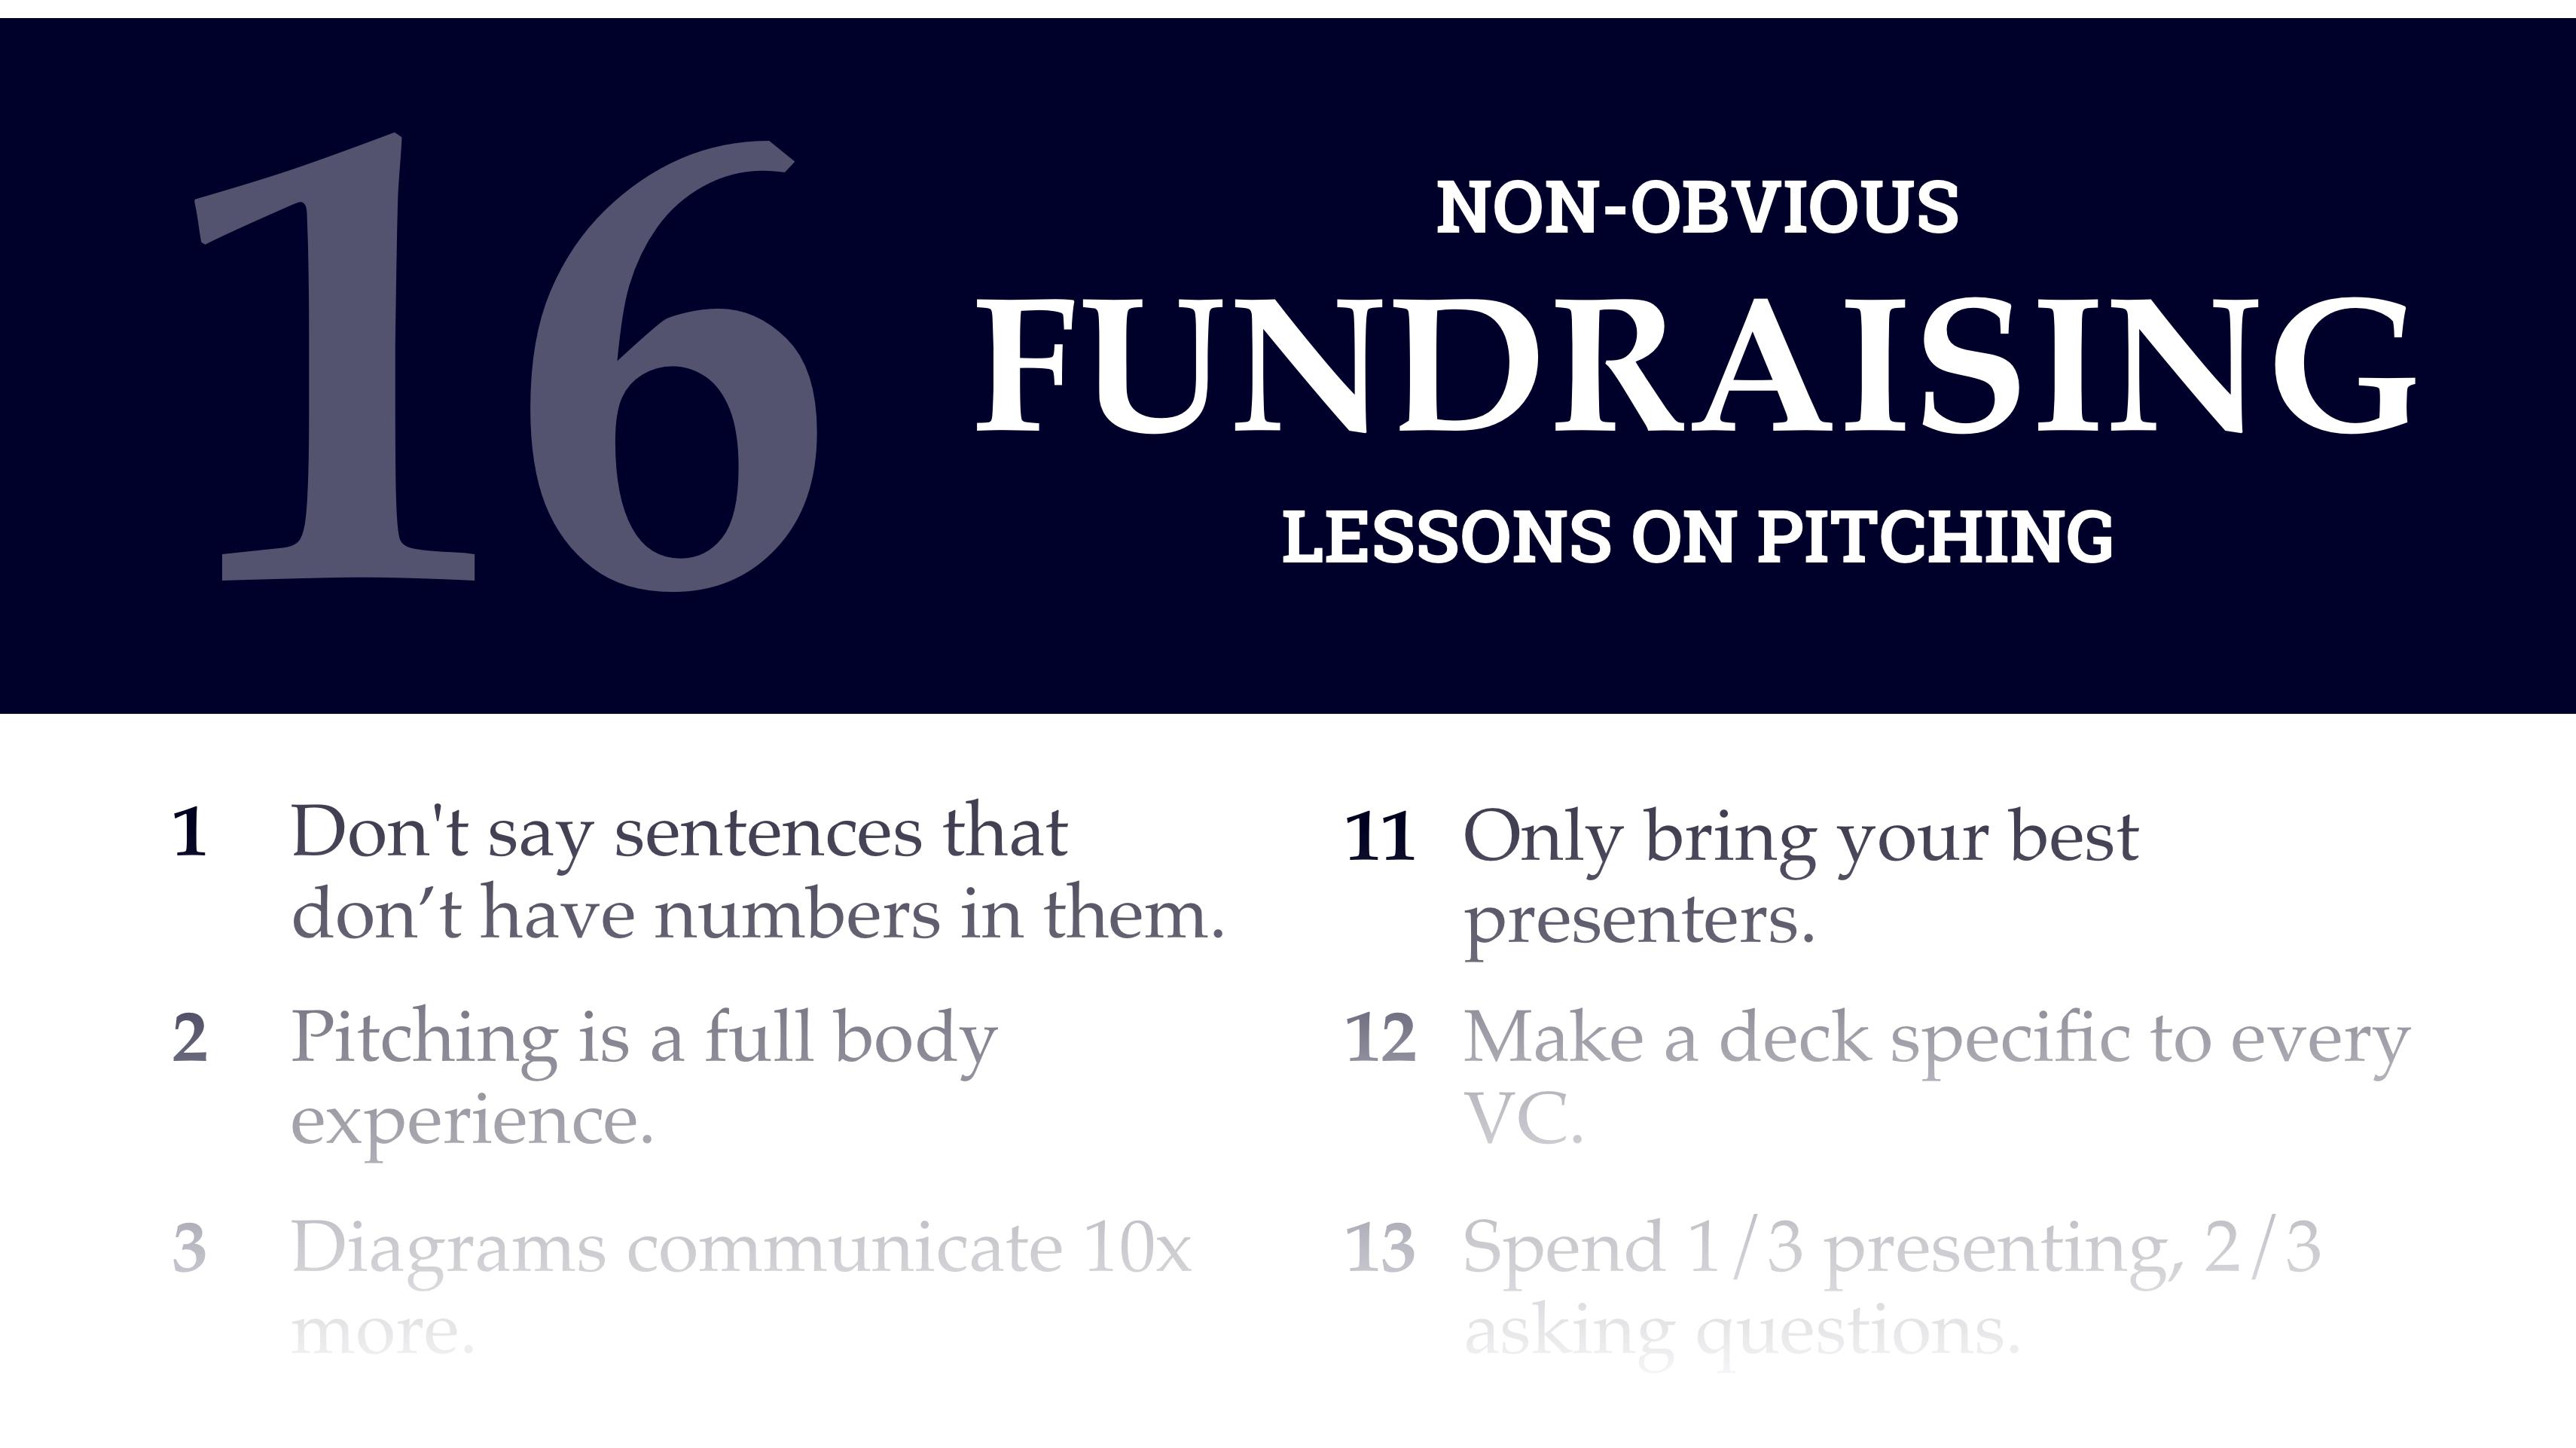 16 Non-Obvious Fundraising Lessons on Pitching